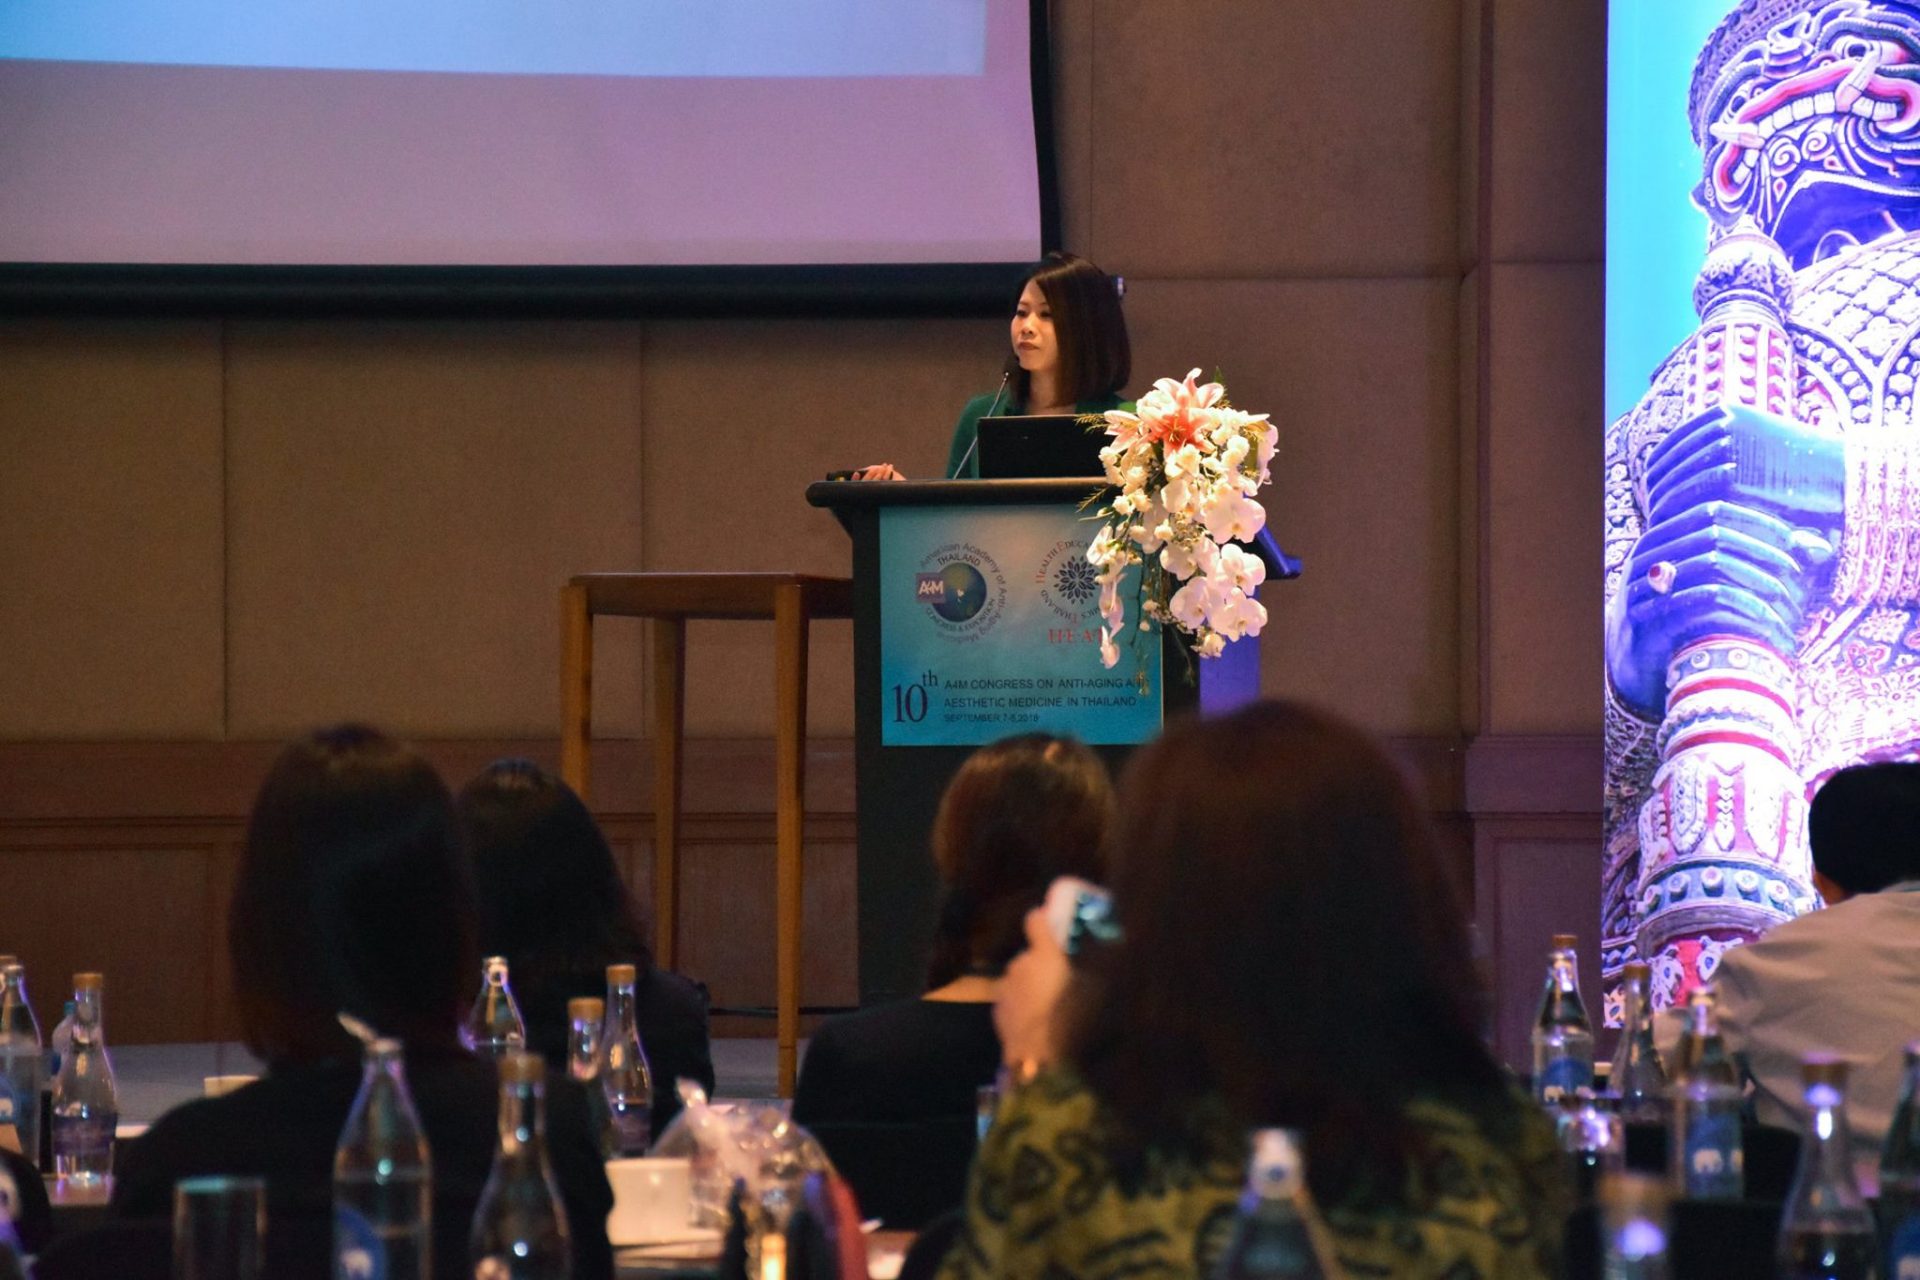 10th A4M Congress on Anti-Aging and Aesthetic Medicine in Thailand